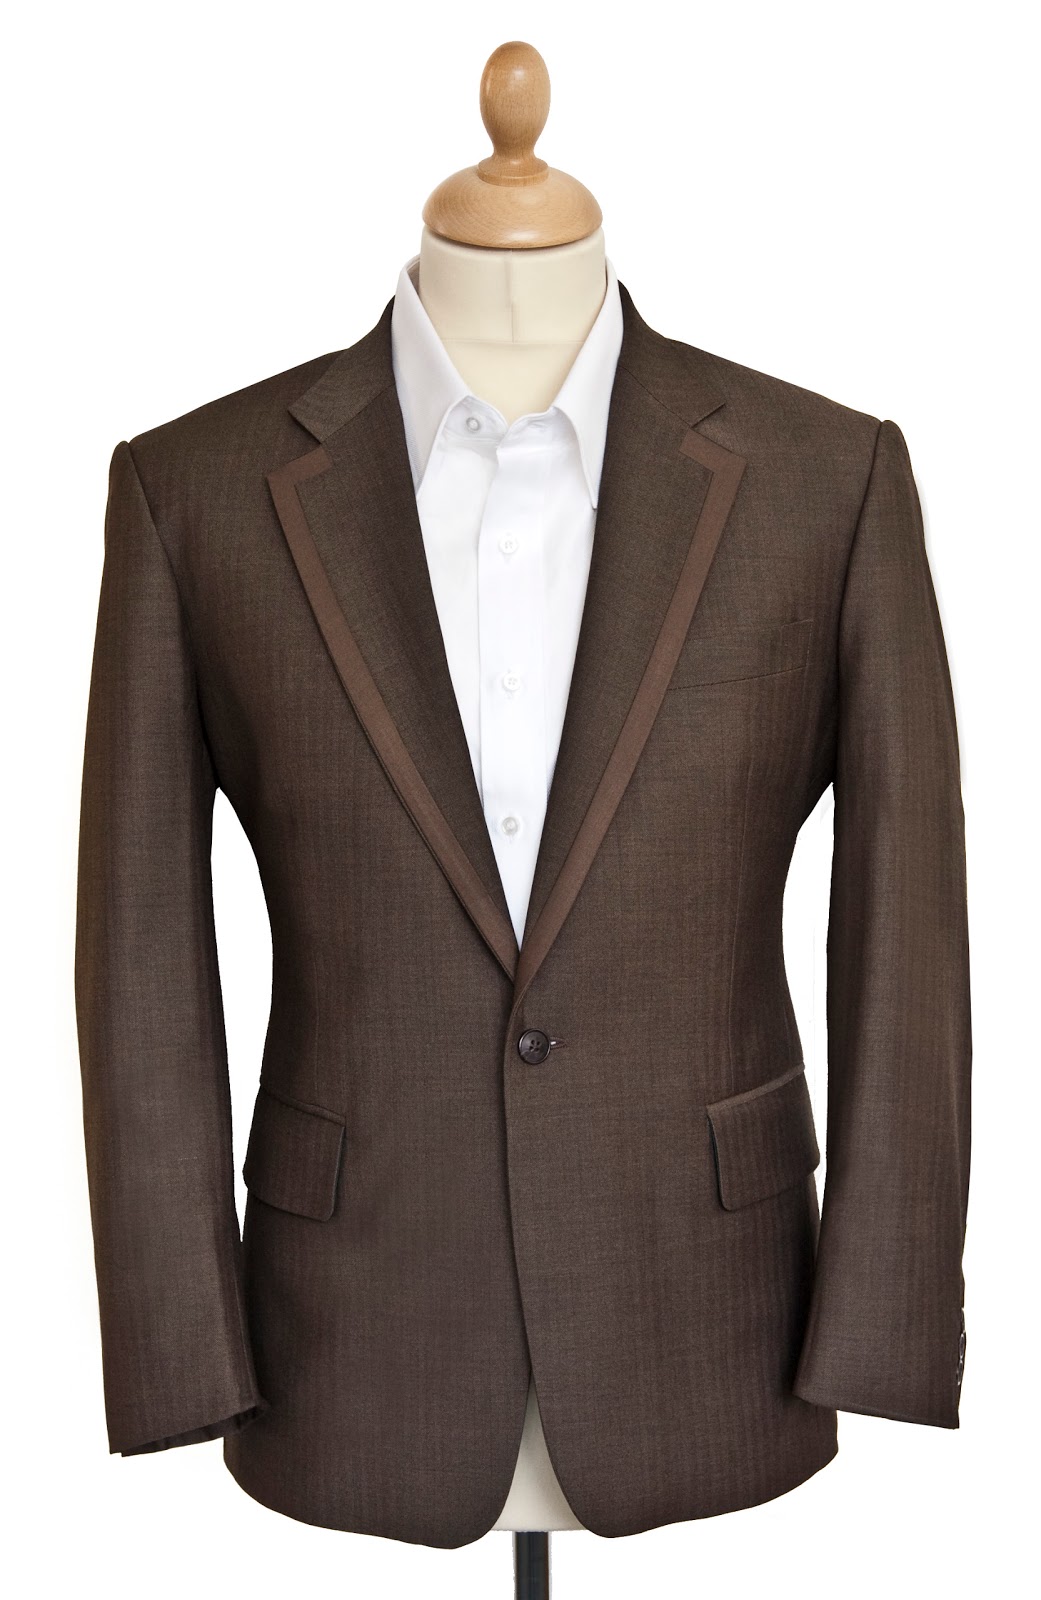 Head & Griffiths: Off-the-peg or made-to-measure suits?